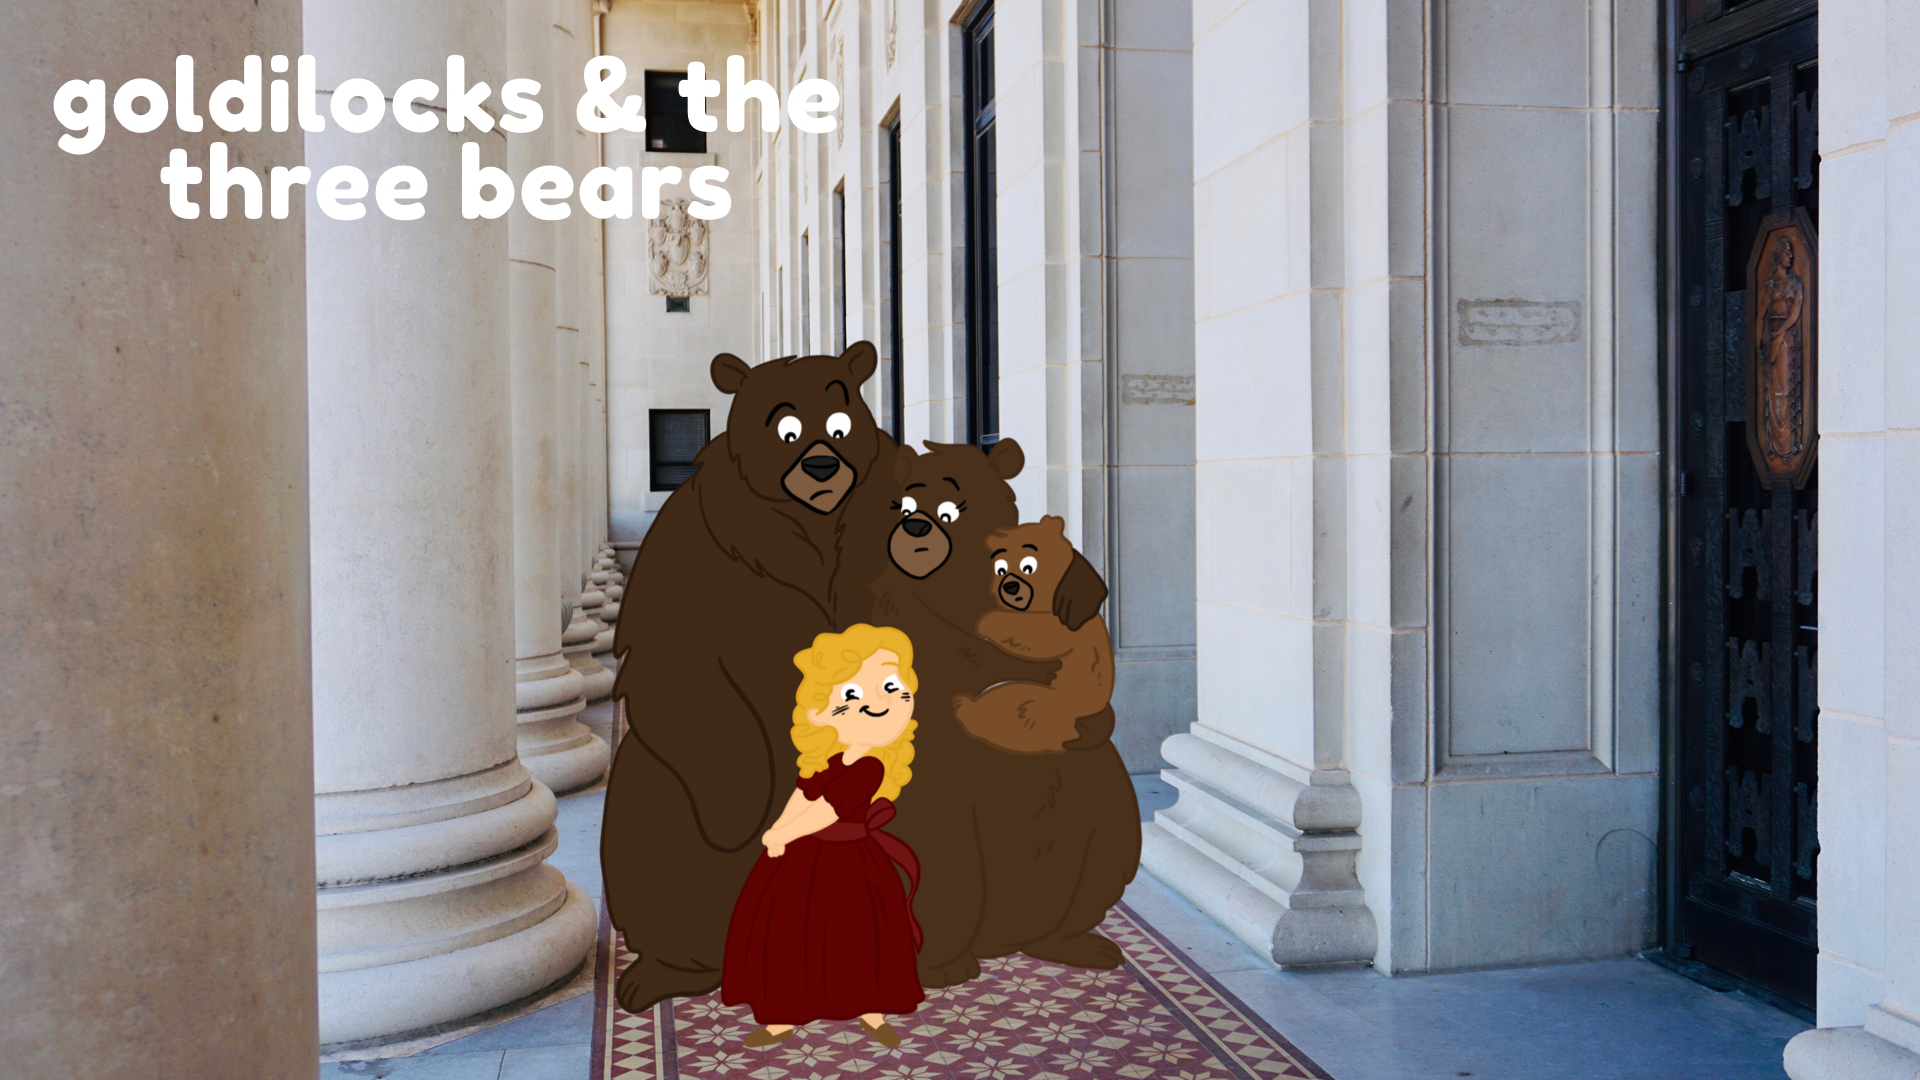 Illustration of Goldilocks and the three bears standing in front of the Administration Building on campus.